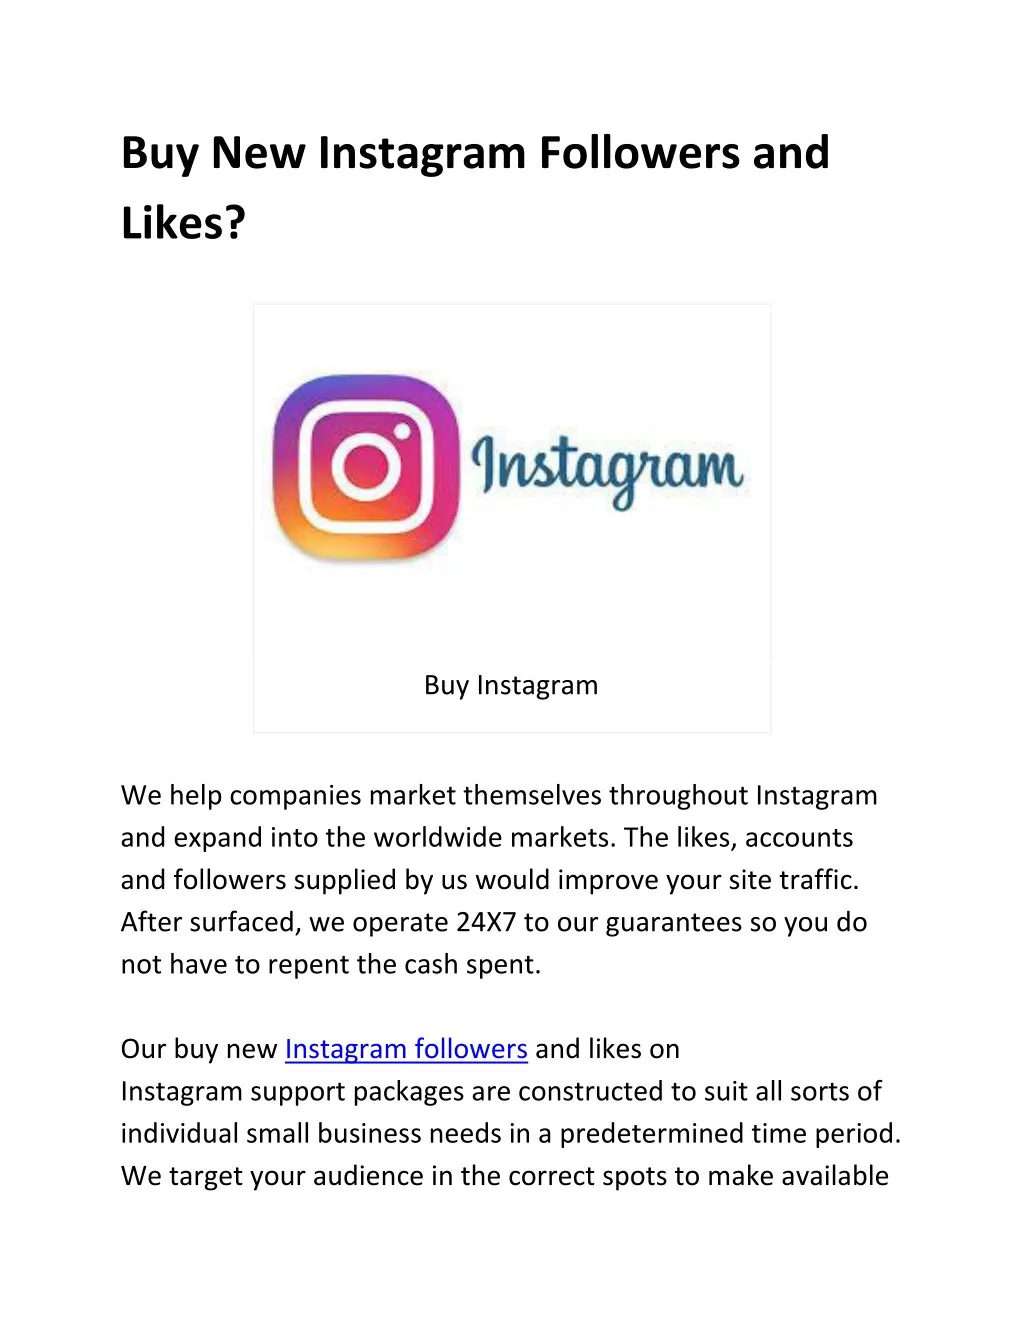 buy new instagram followers and likes